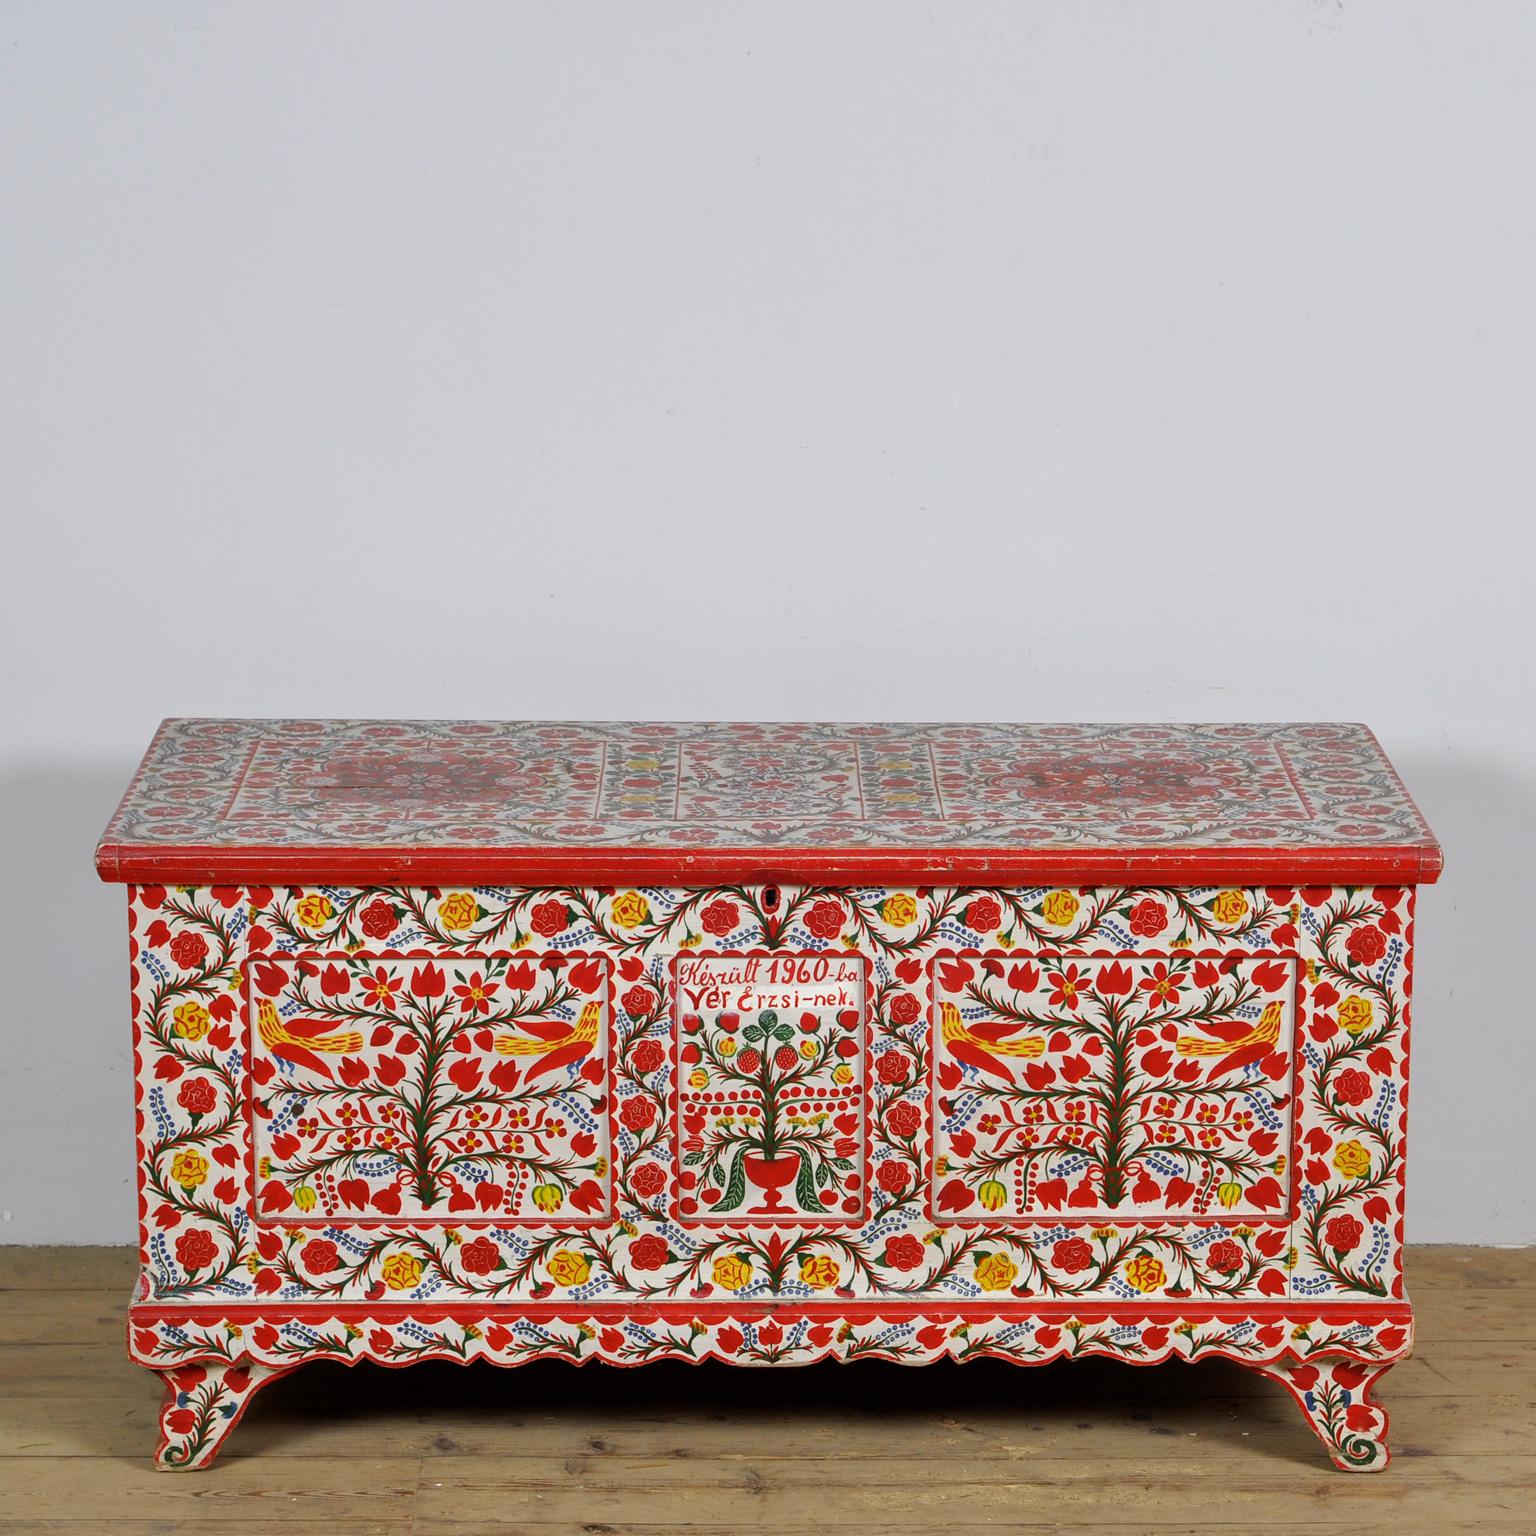  A beautiful example of a wedding chest from the hungarian tribes of the kalota, the illustrations are traditional with images of flowers and tulips. The chest was part of a dowry package and would be kept in the clean room of the house with the